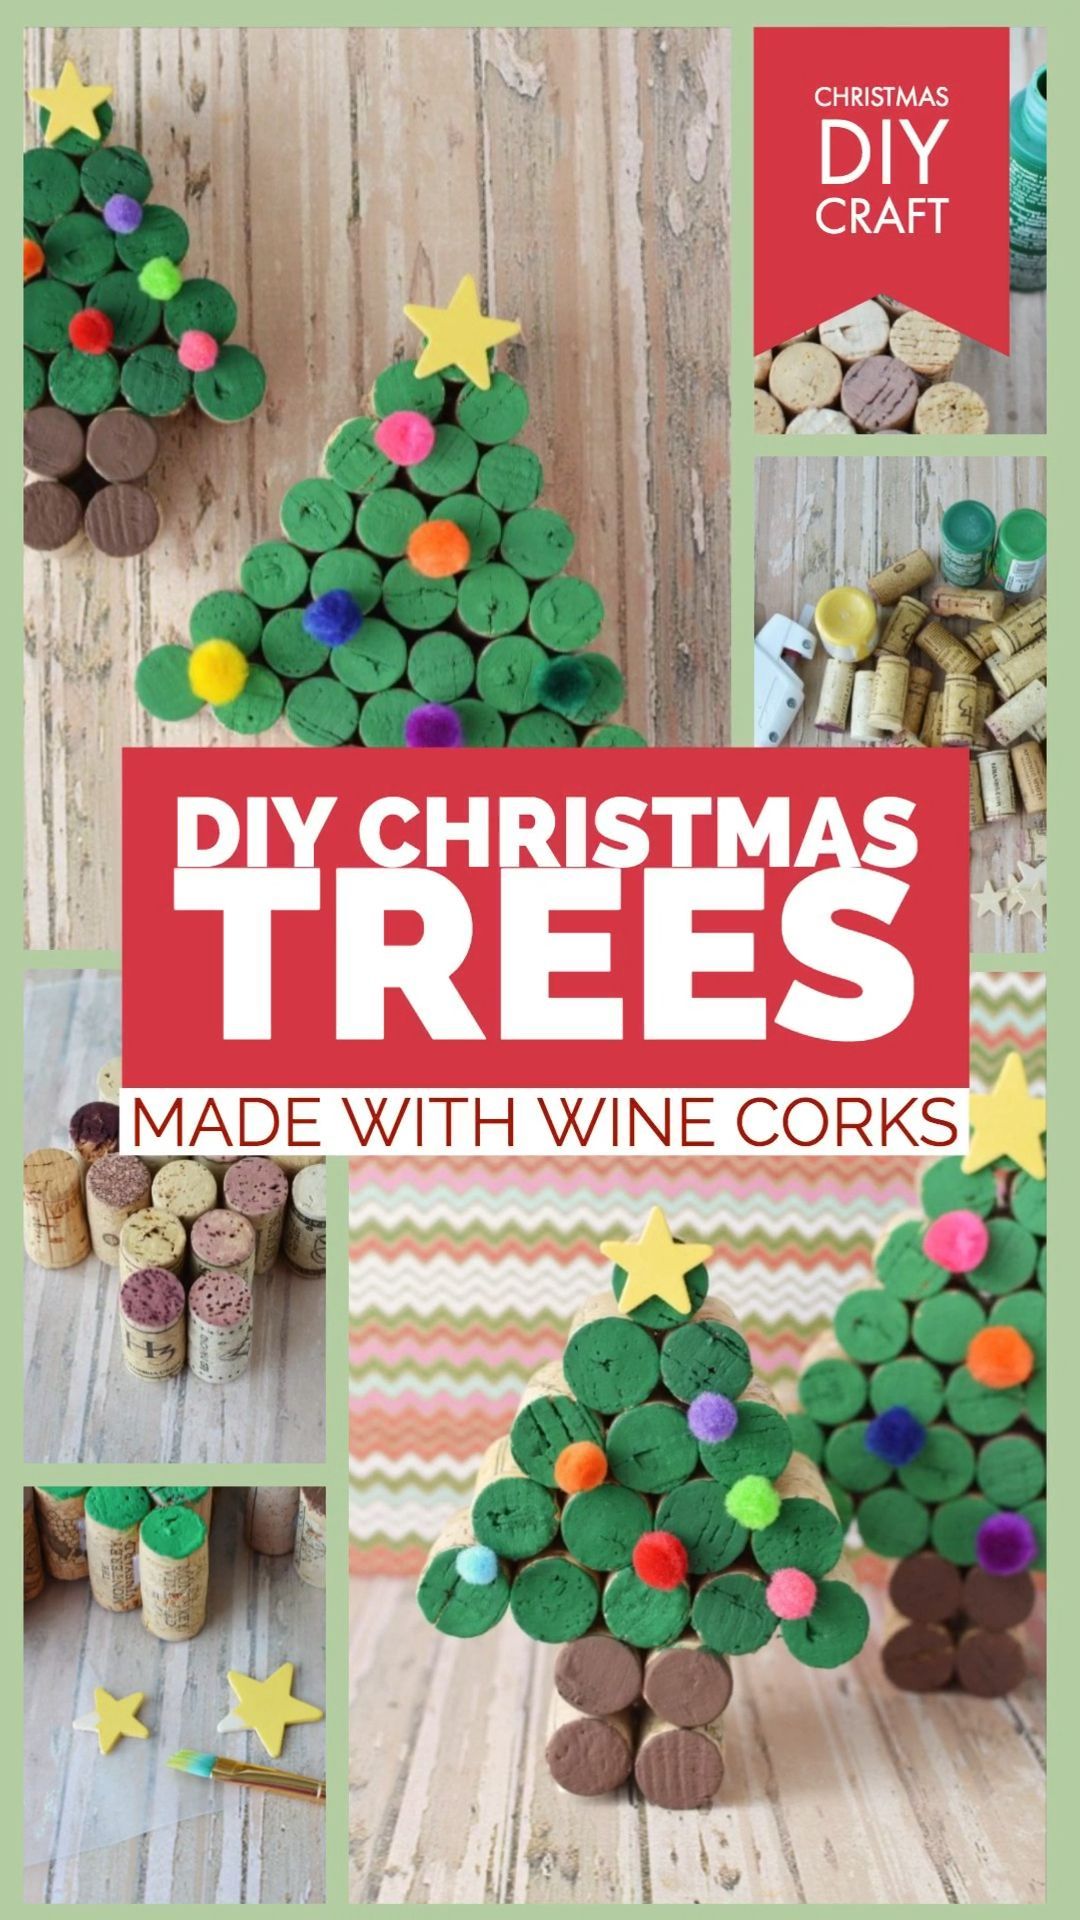 DIY Christmas Tree Craft made with wine corks - DIY Christmas Tree Craft made with wine corks -   diy Christmas Decorations wine bottles